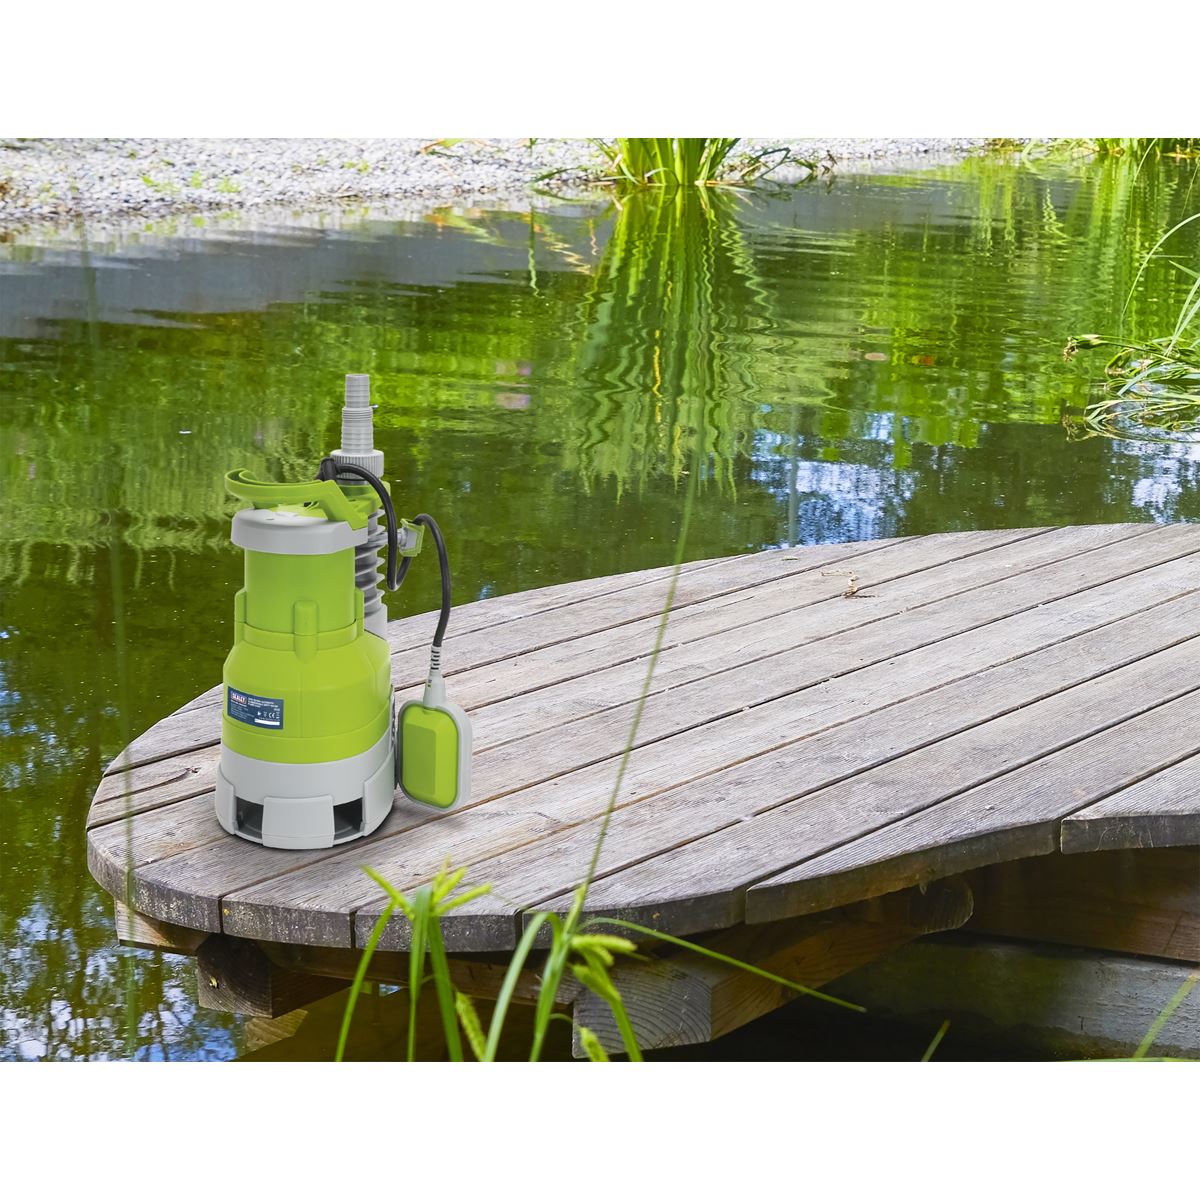 Sealey Submersible Dirty Water Pump Automatic 225L/min 230V